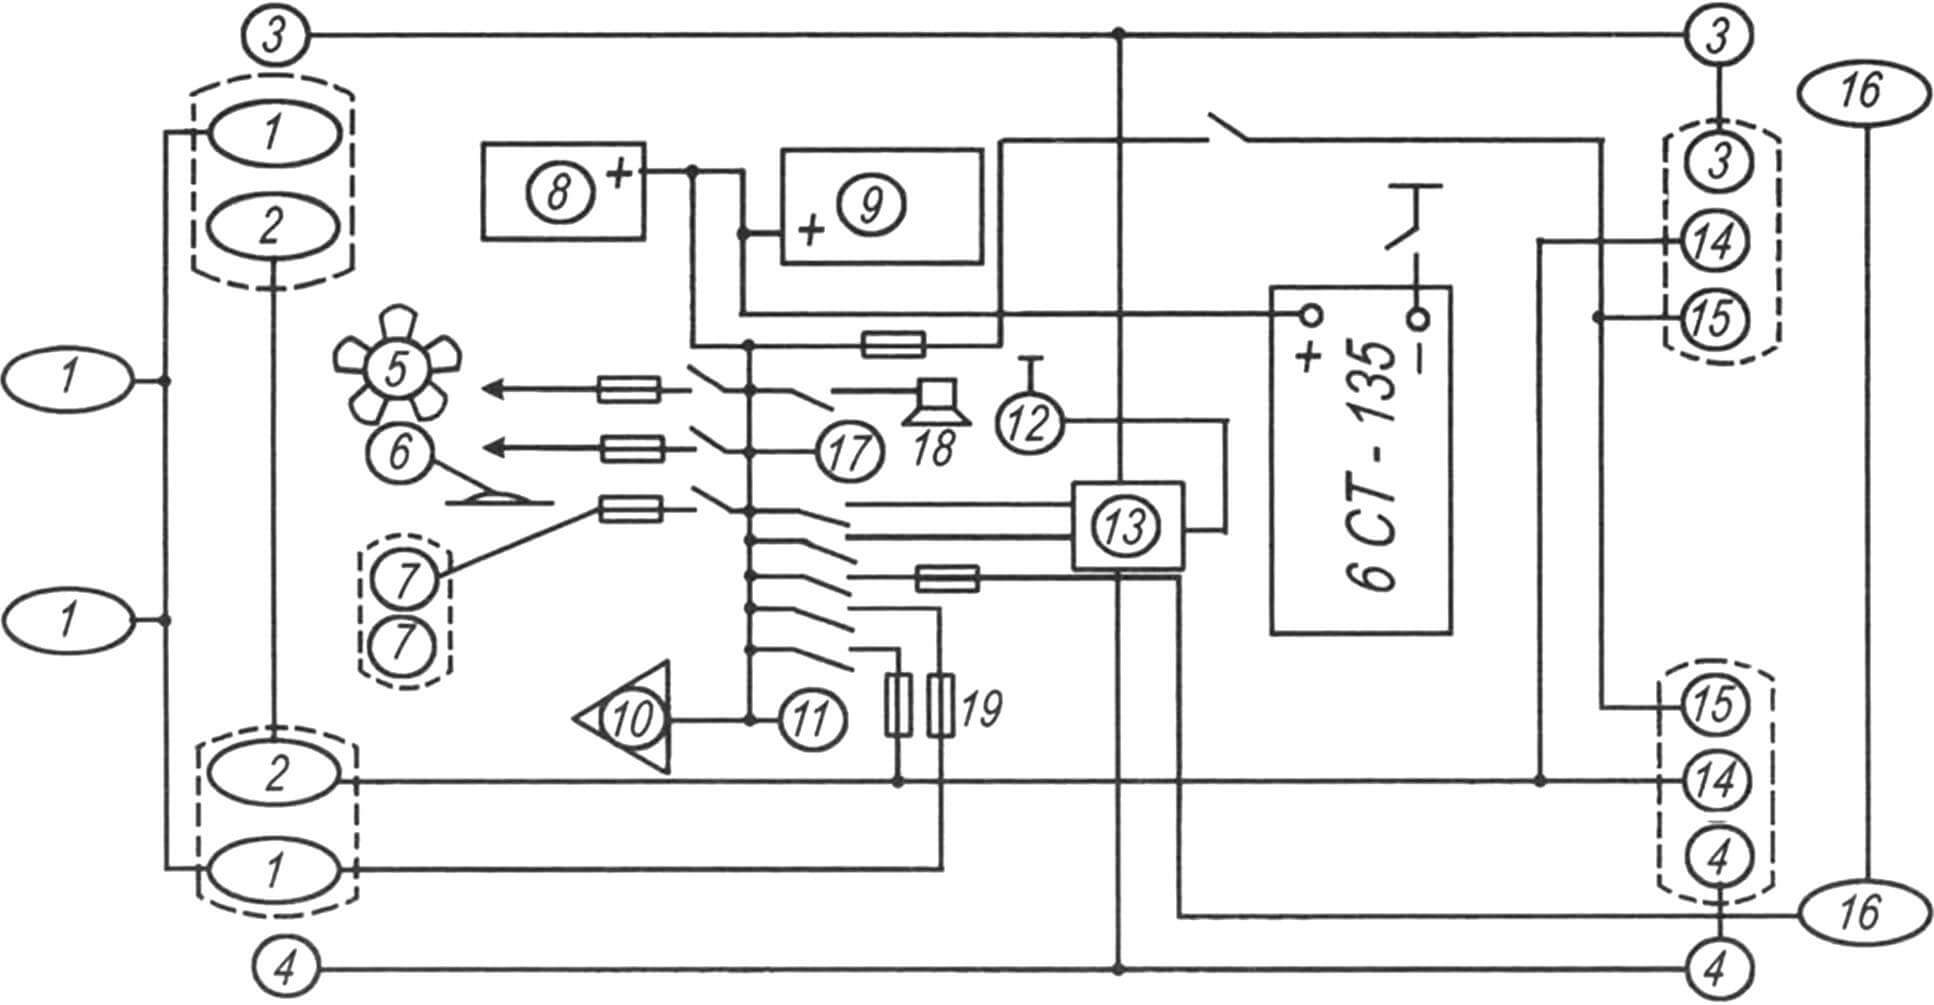 Tractor electrical diagram